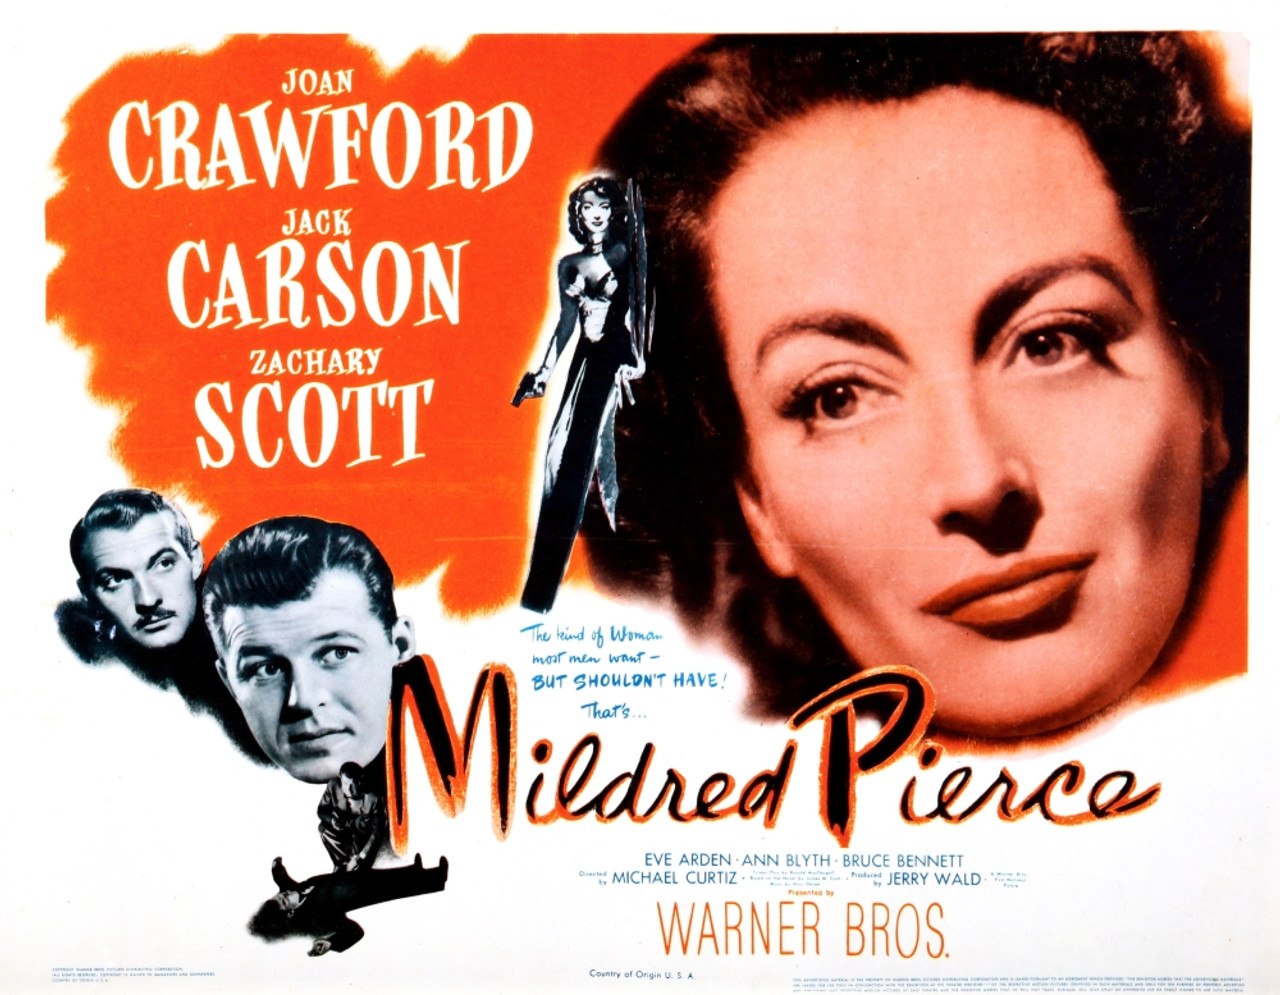 Mildred Pierce: A Classic Exploration of Relationships and Gender Roles in Hollywood Cinema